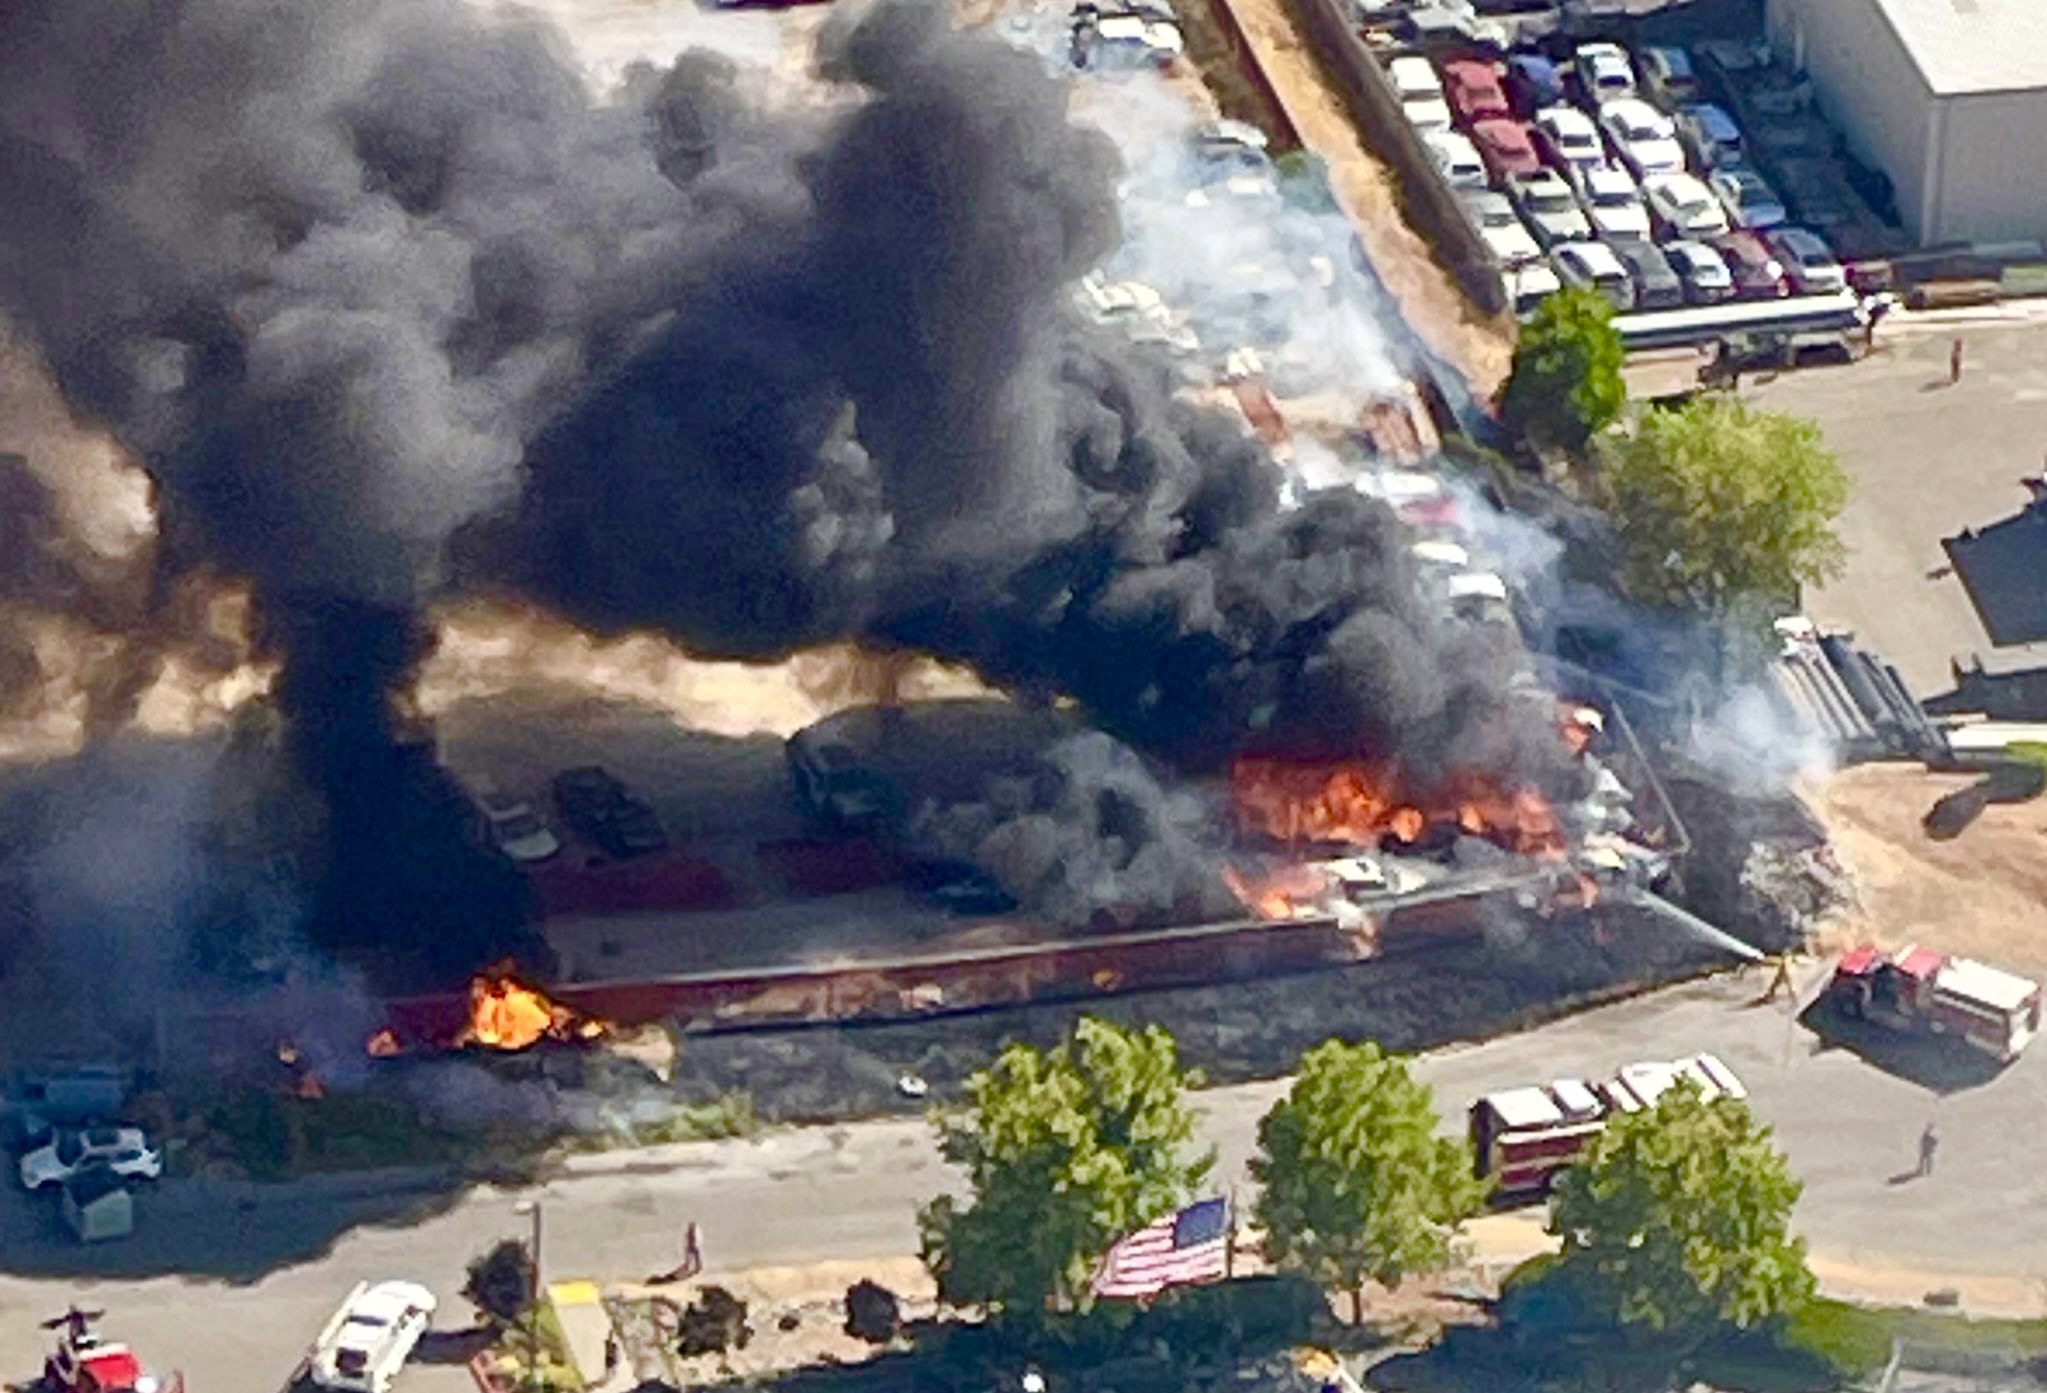 Firefighters extinguish multiple cars at Rancho Cordova wrecking yard fire